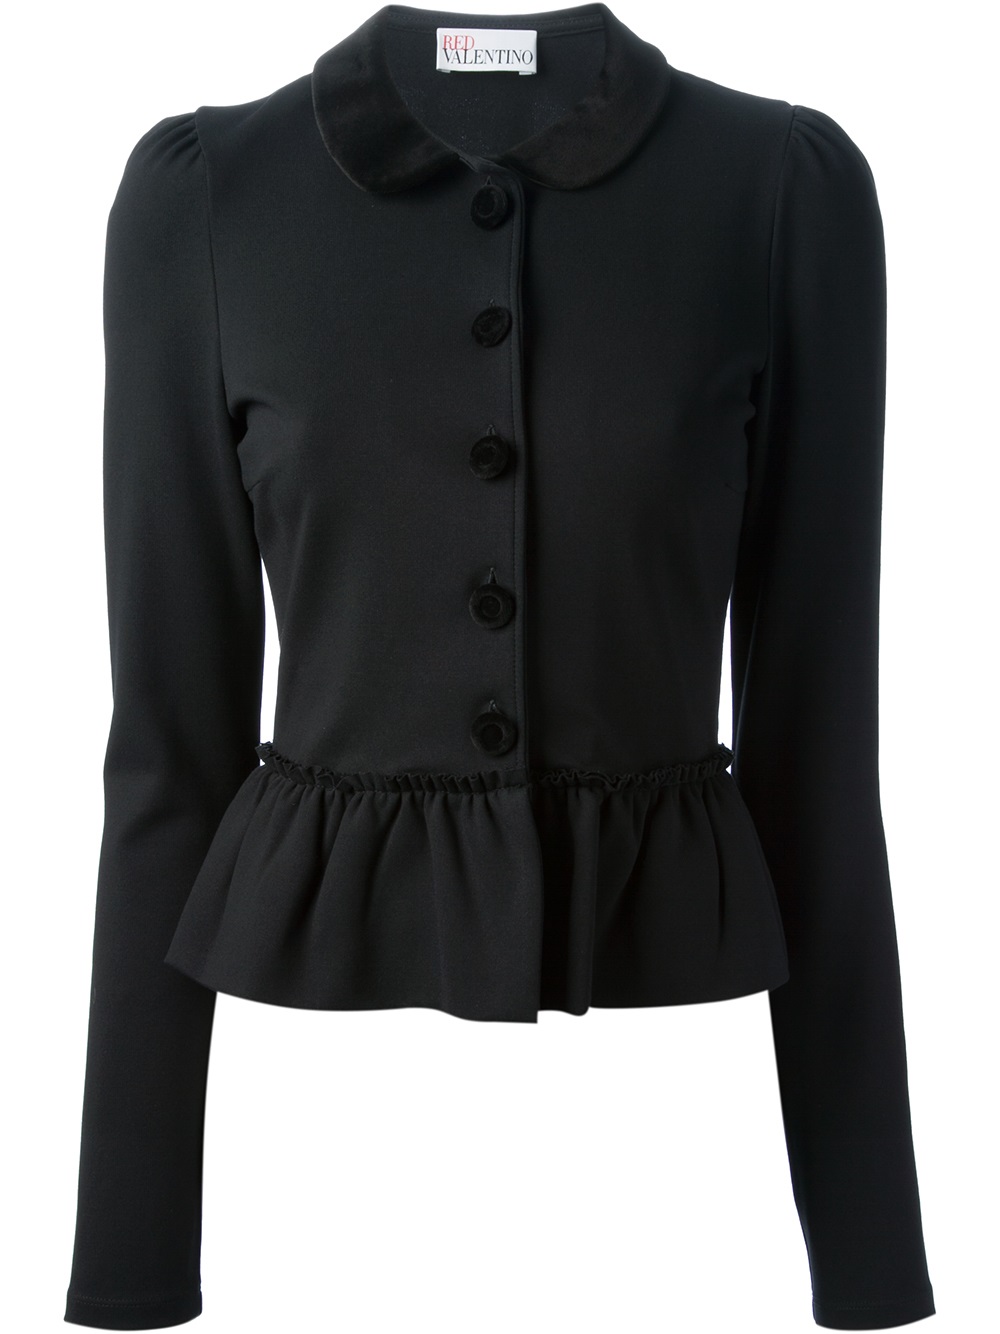 Lyst - Red Valentino Ruffled Jacket in Black